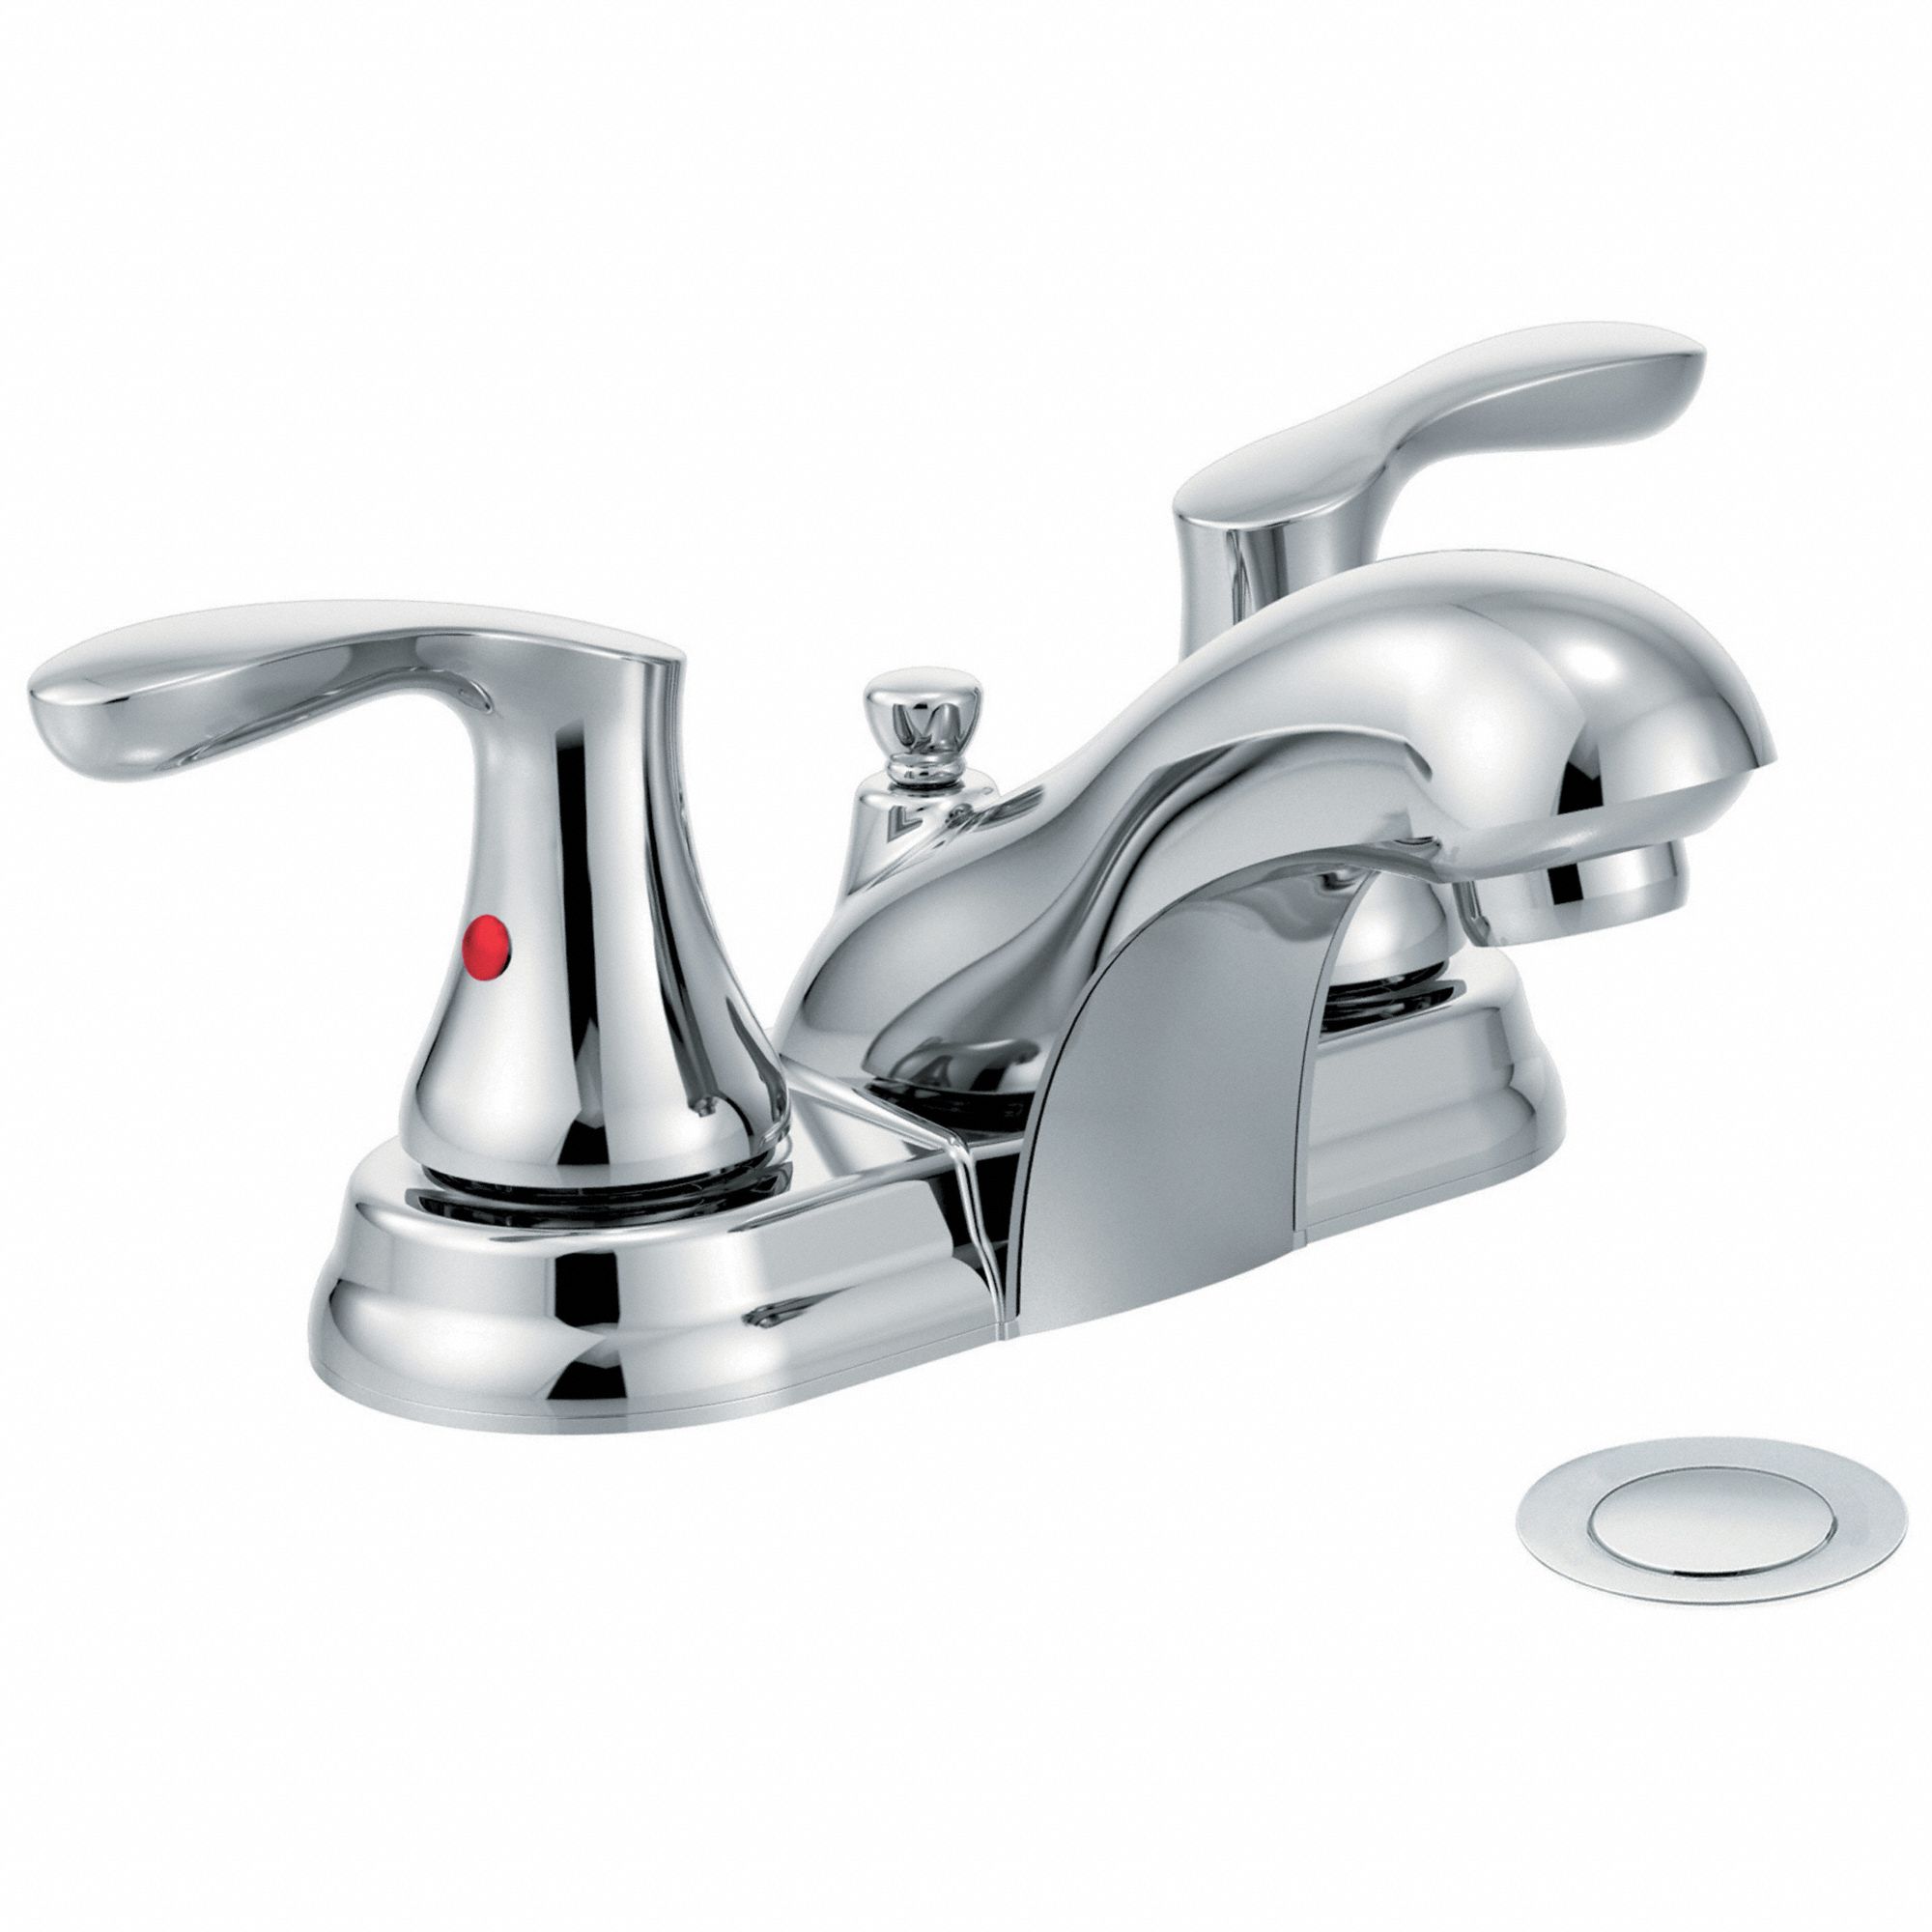 Bathroom Faucet: Cornerstone®, Chrome Finish, 1.5 gpm Flow Rate, Manual